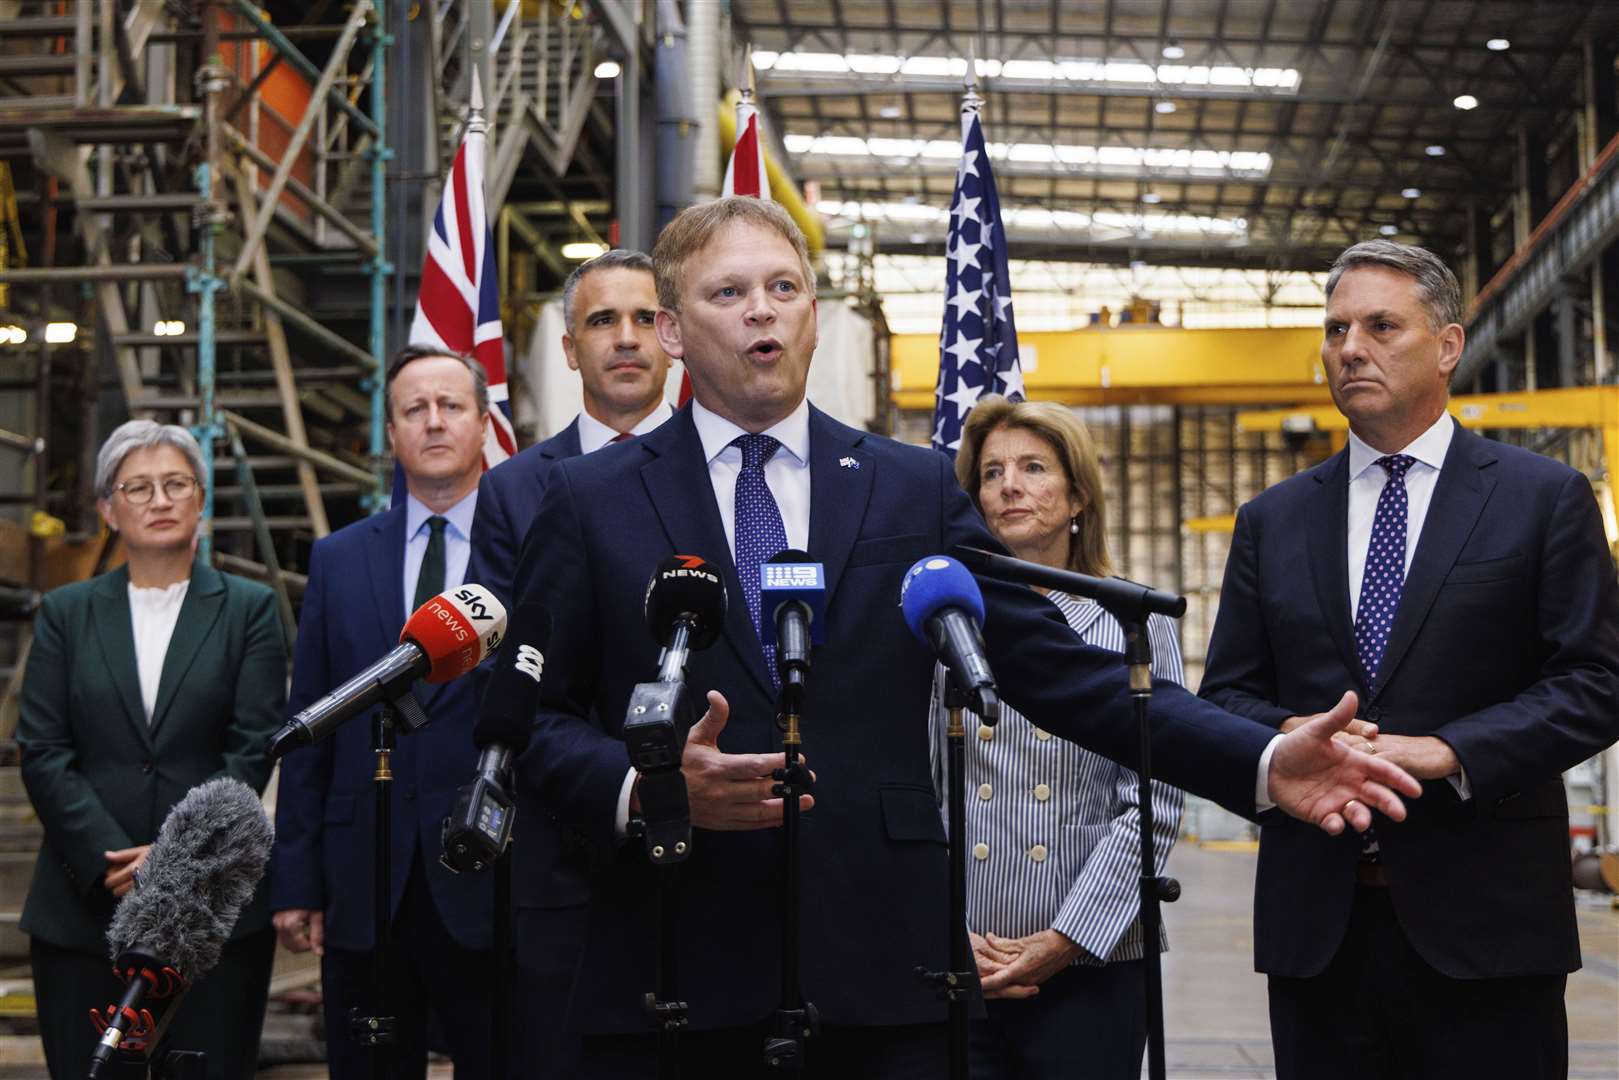 Defence Secretary Grant Shapps speaks to the media as Premier of South Australia Peter Malinauskas, third left, Australian Minister for Foreign Affairs Penny Wong, left, Deputy Prime Minister of Australia Richard Marles, right, Foreign Secretary David Cameron and United States Ambassador to Australia Caroline Kennedy, second right, listen during a visit to the Osborne Naval Shipyard in Adelaide (Matt Turner/AAP/AP)